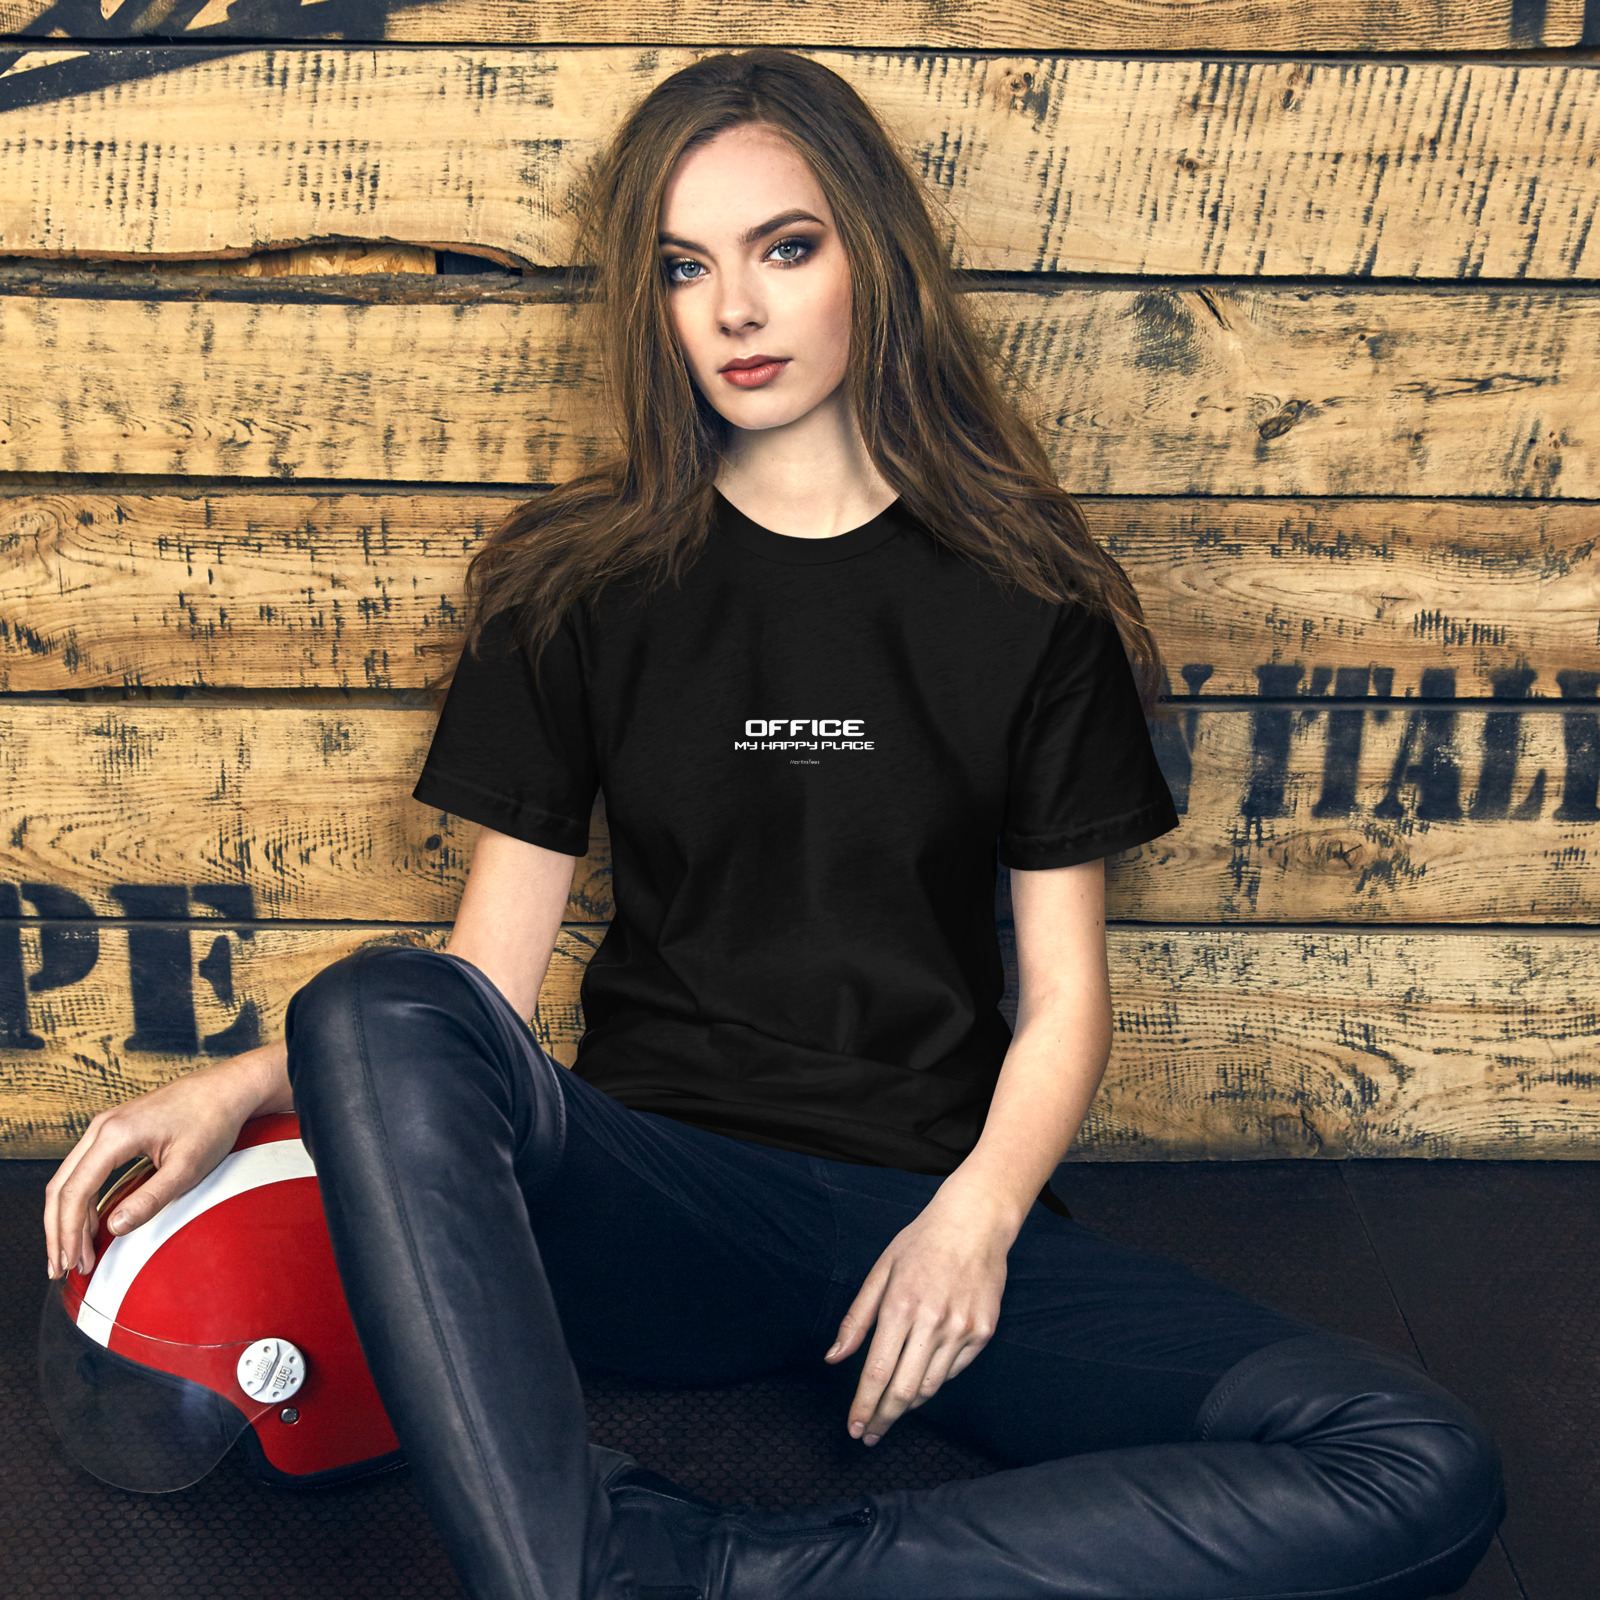 T-shirt: OFFICE - MY HAPPY PLACE